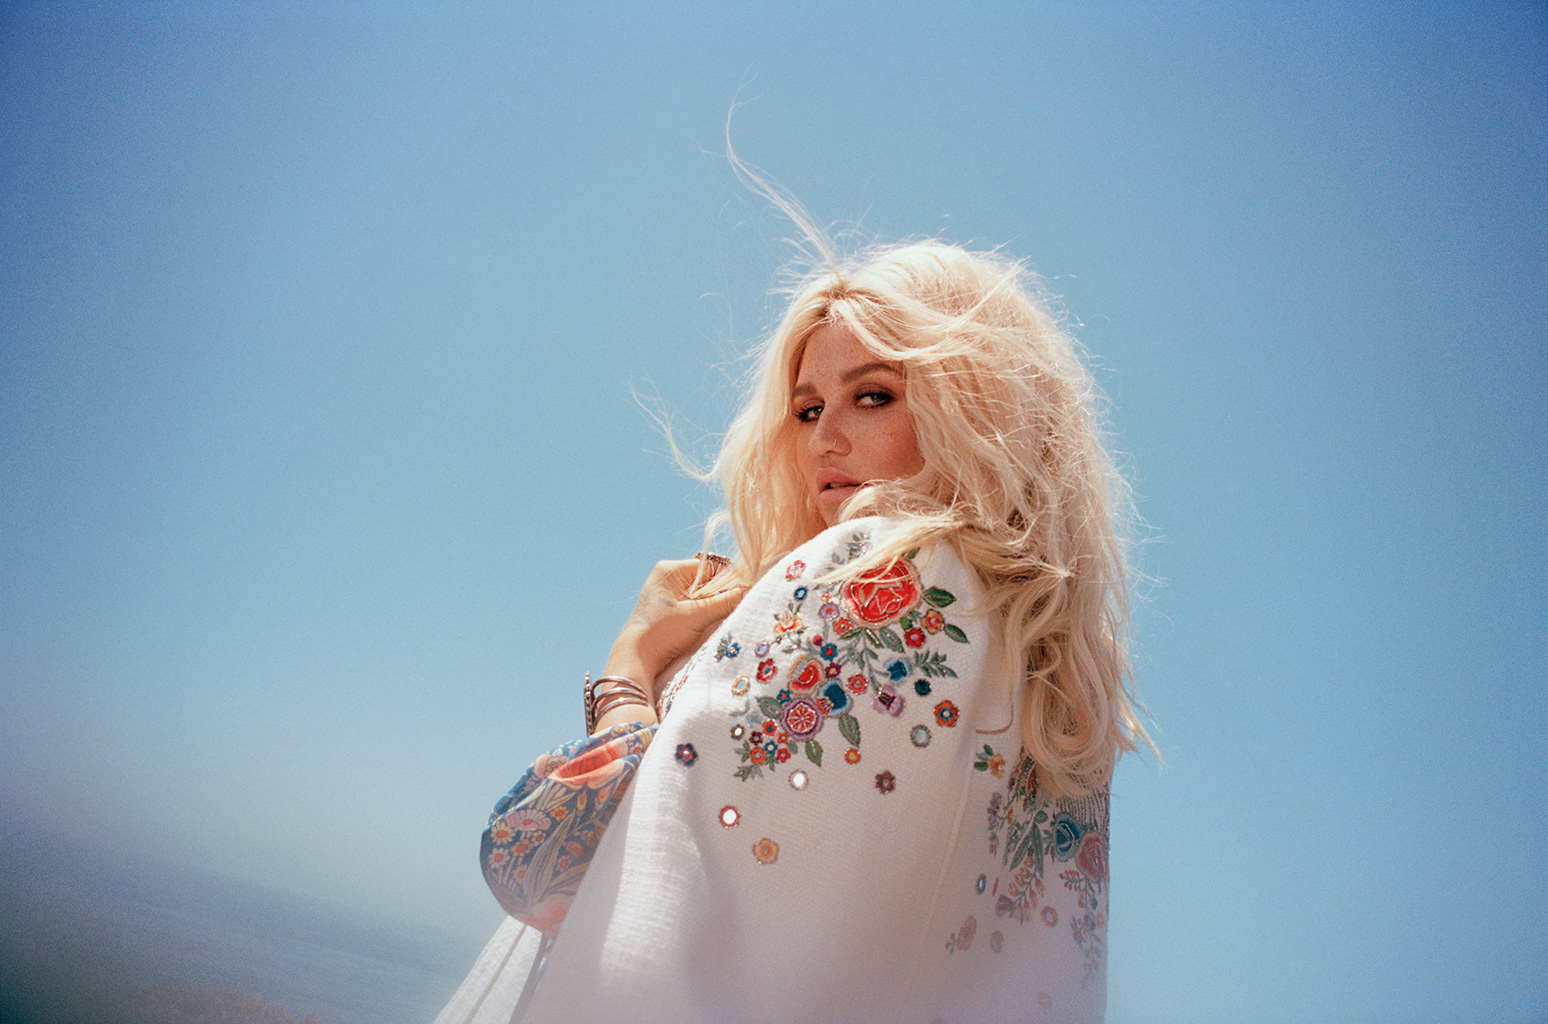 Kesha releases new song, “Resentment” (feat. Sturgill Simpson, Brian Wilson & Wrabel)